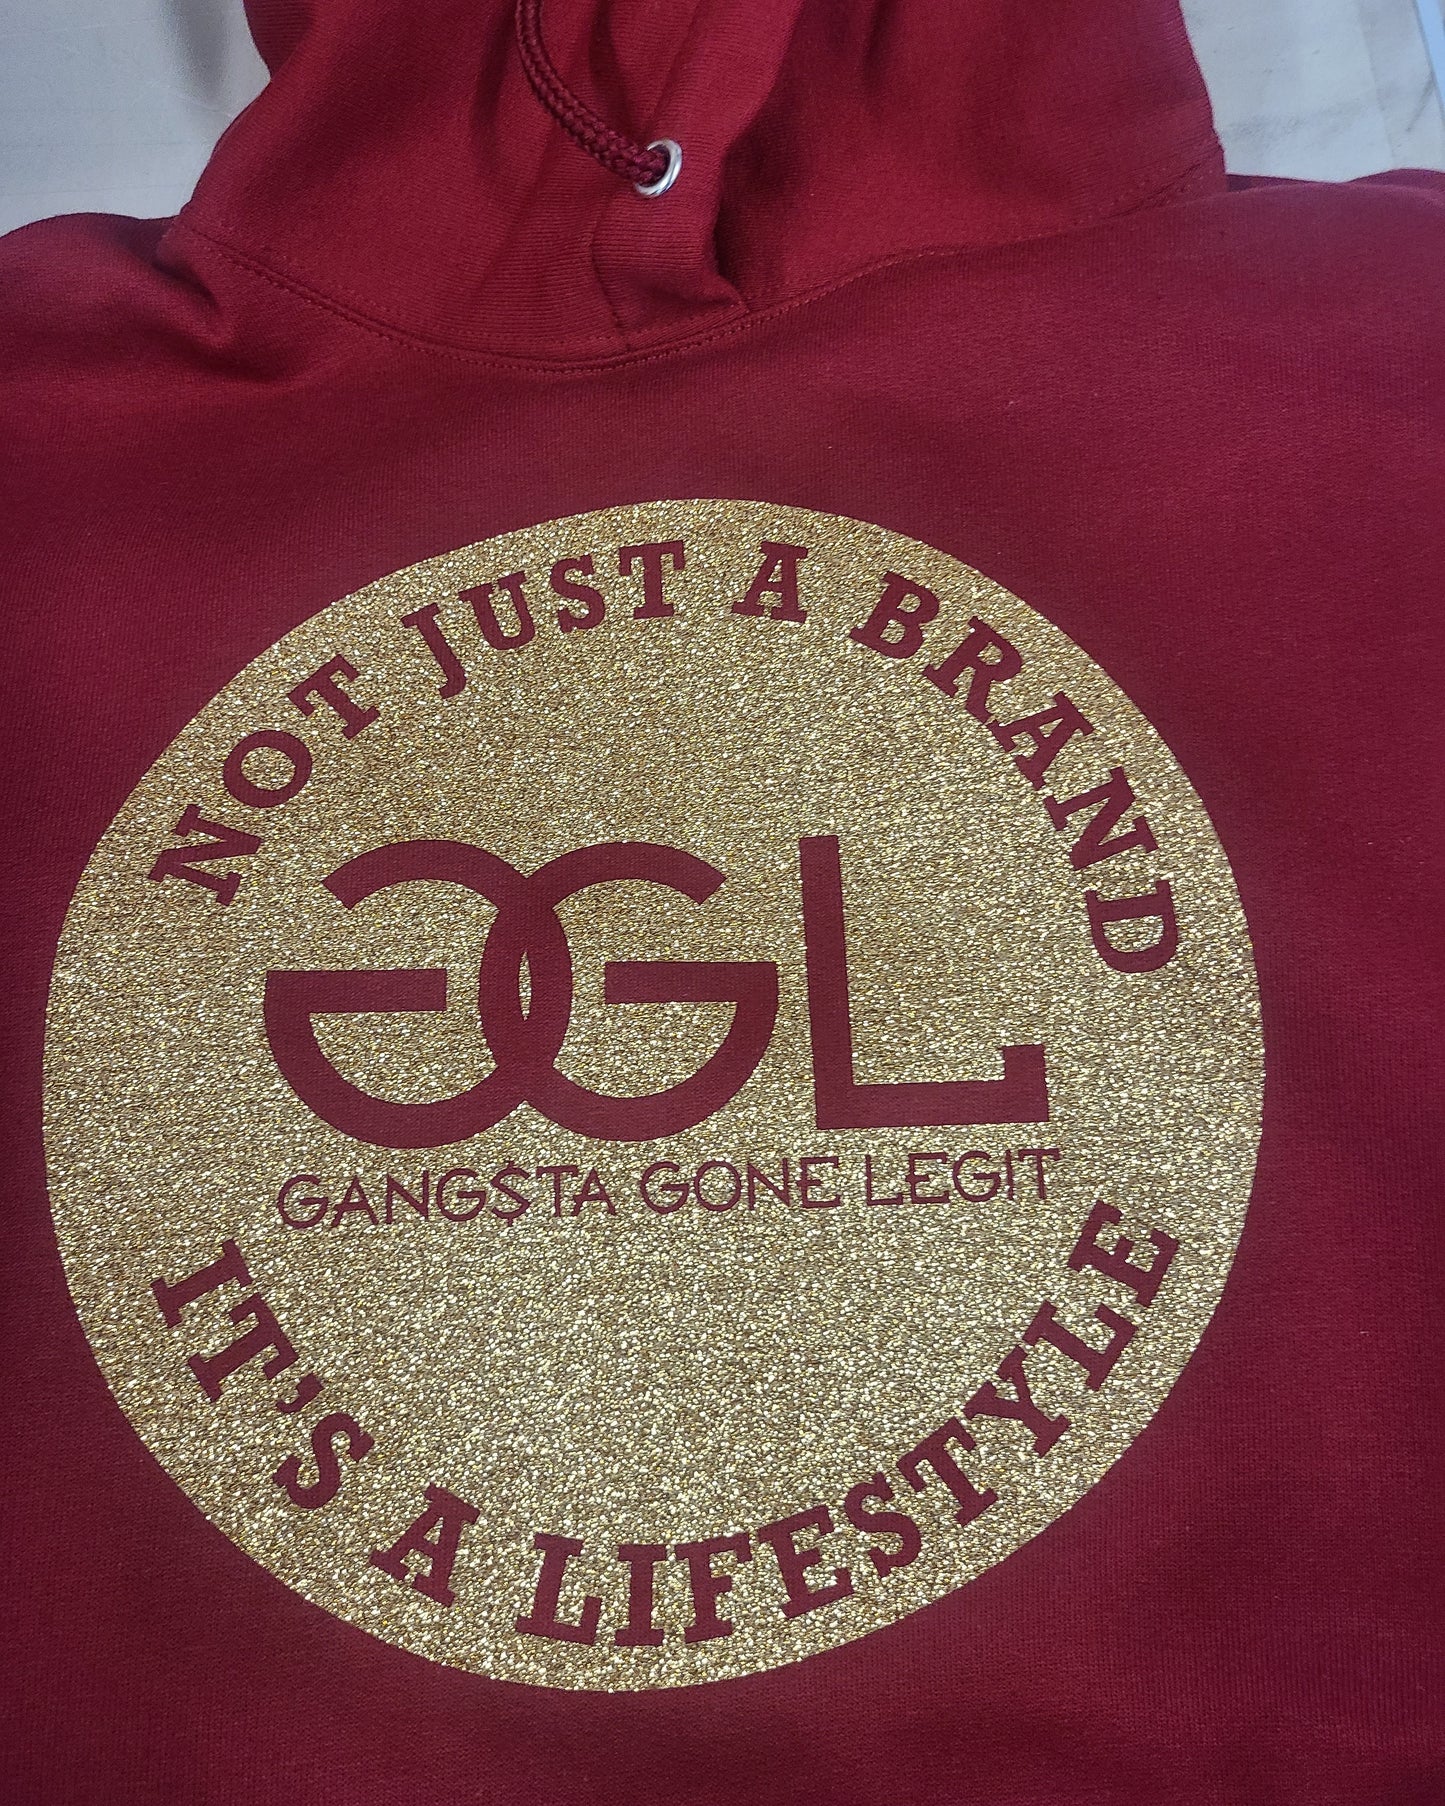 GGl Not just a brand,it's a lifestyle